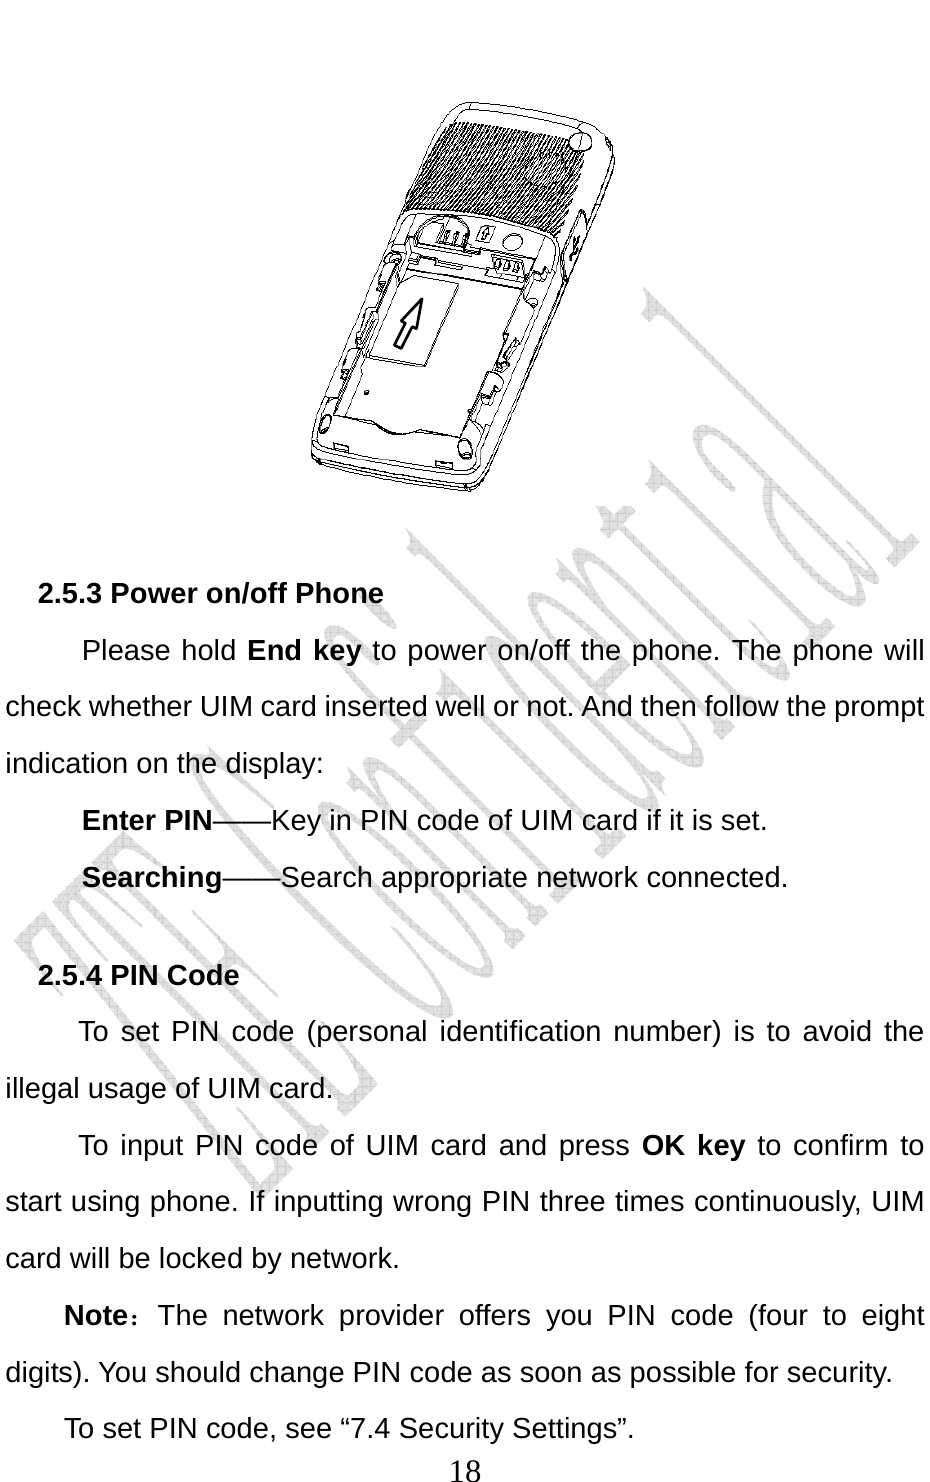                              18     2.5.3 Power on/off Phone Please hold End key to power on/off the phone. The phone will check whether UIM card inserted well or not. And then follow the prompt indication on the display: Enter PIN——Key in PIN code of UIM card if it is set.                 Searching——Search appropriate network connected. 2.5.4 PIN Code To set PIN code (personal identification number) is to avoid the illegal usage of UIM card. To input PIN code of UIM card and press OK key to confirm to start using phone. If inputting wrong PIN three times continuously, UIM card will be locked by network. Note：The network provider offers you PIN code (four to eight digits). You should change PIN code as soon as possible for security.   To set PIN code, see “7.4 Security Settings”. 